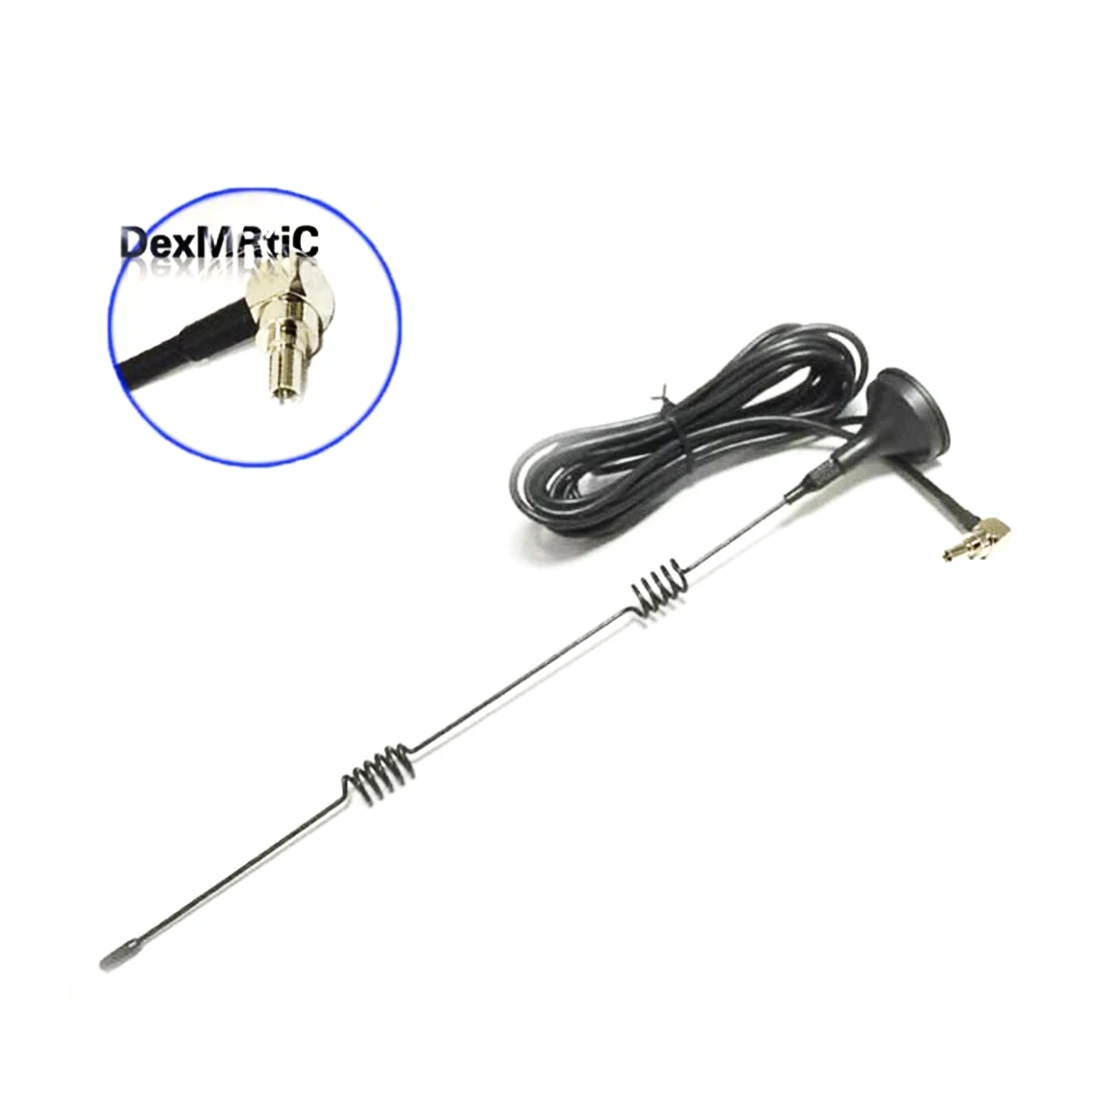 

2.4GHz 5dBi Wifi Antenna TS9 Right Angle Connector 3m Cable Magnetic Base Wireless Router Booster 1pc